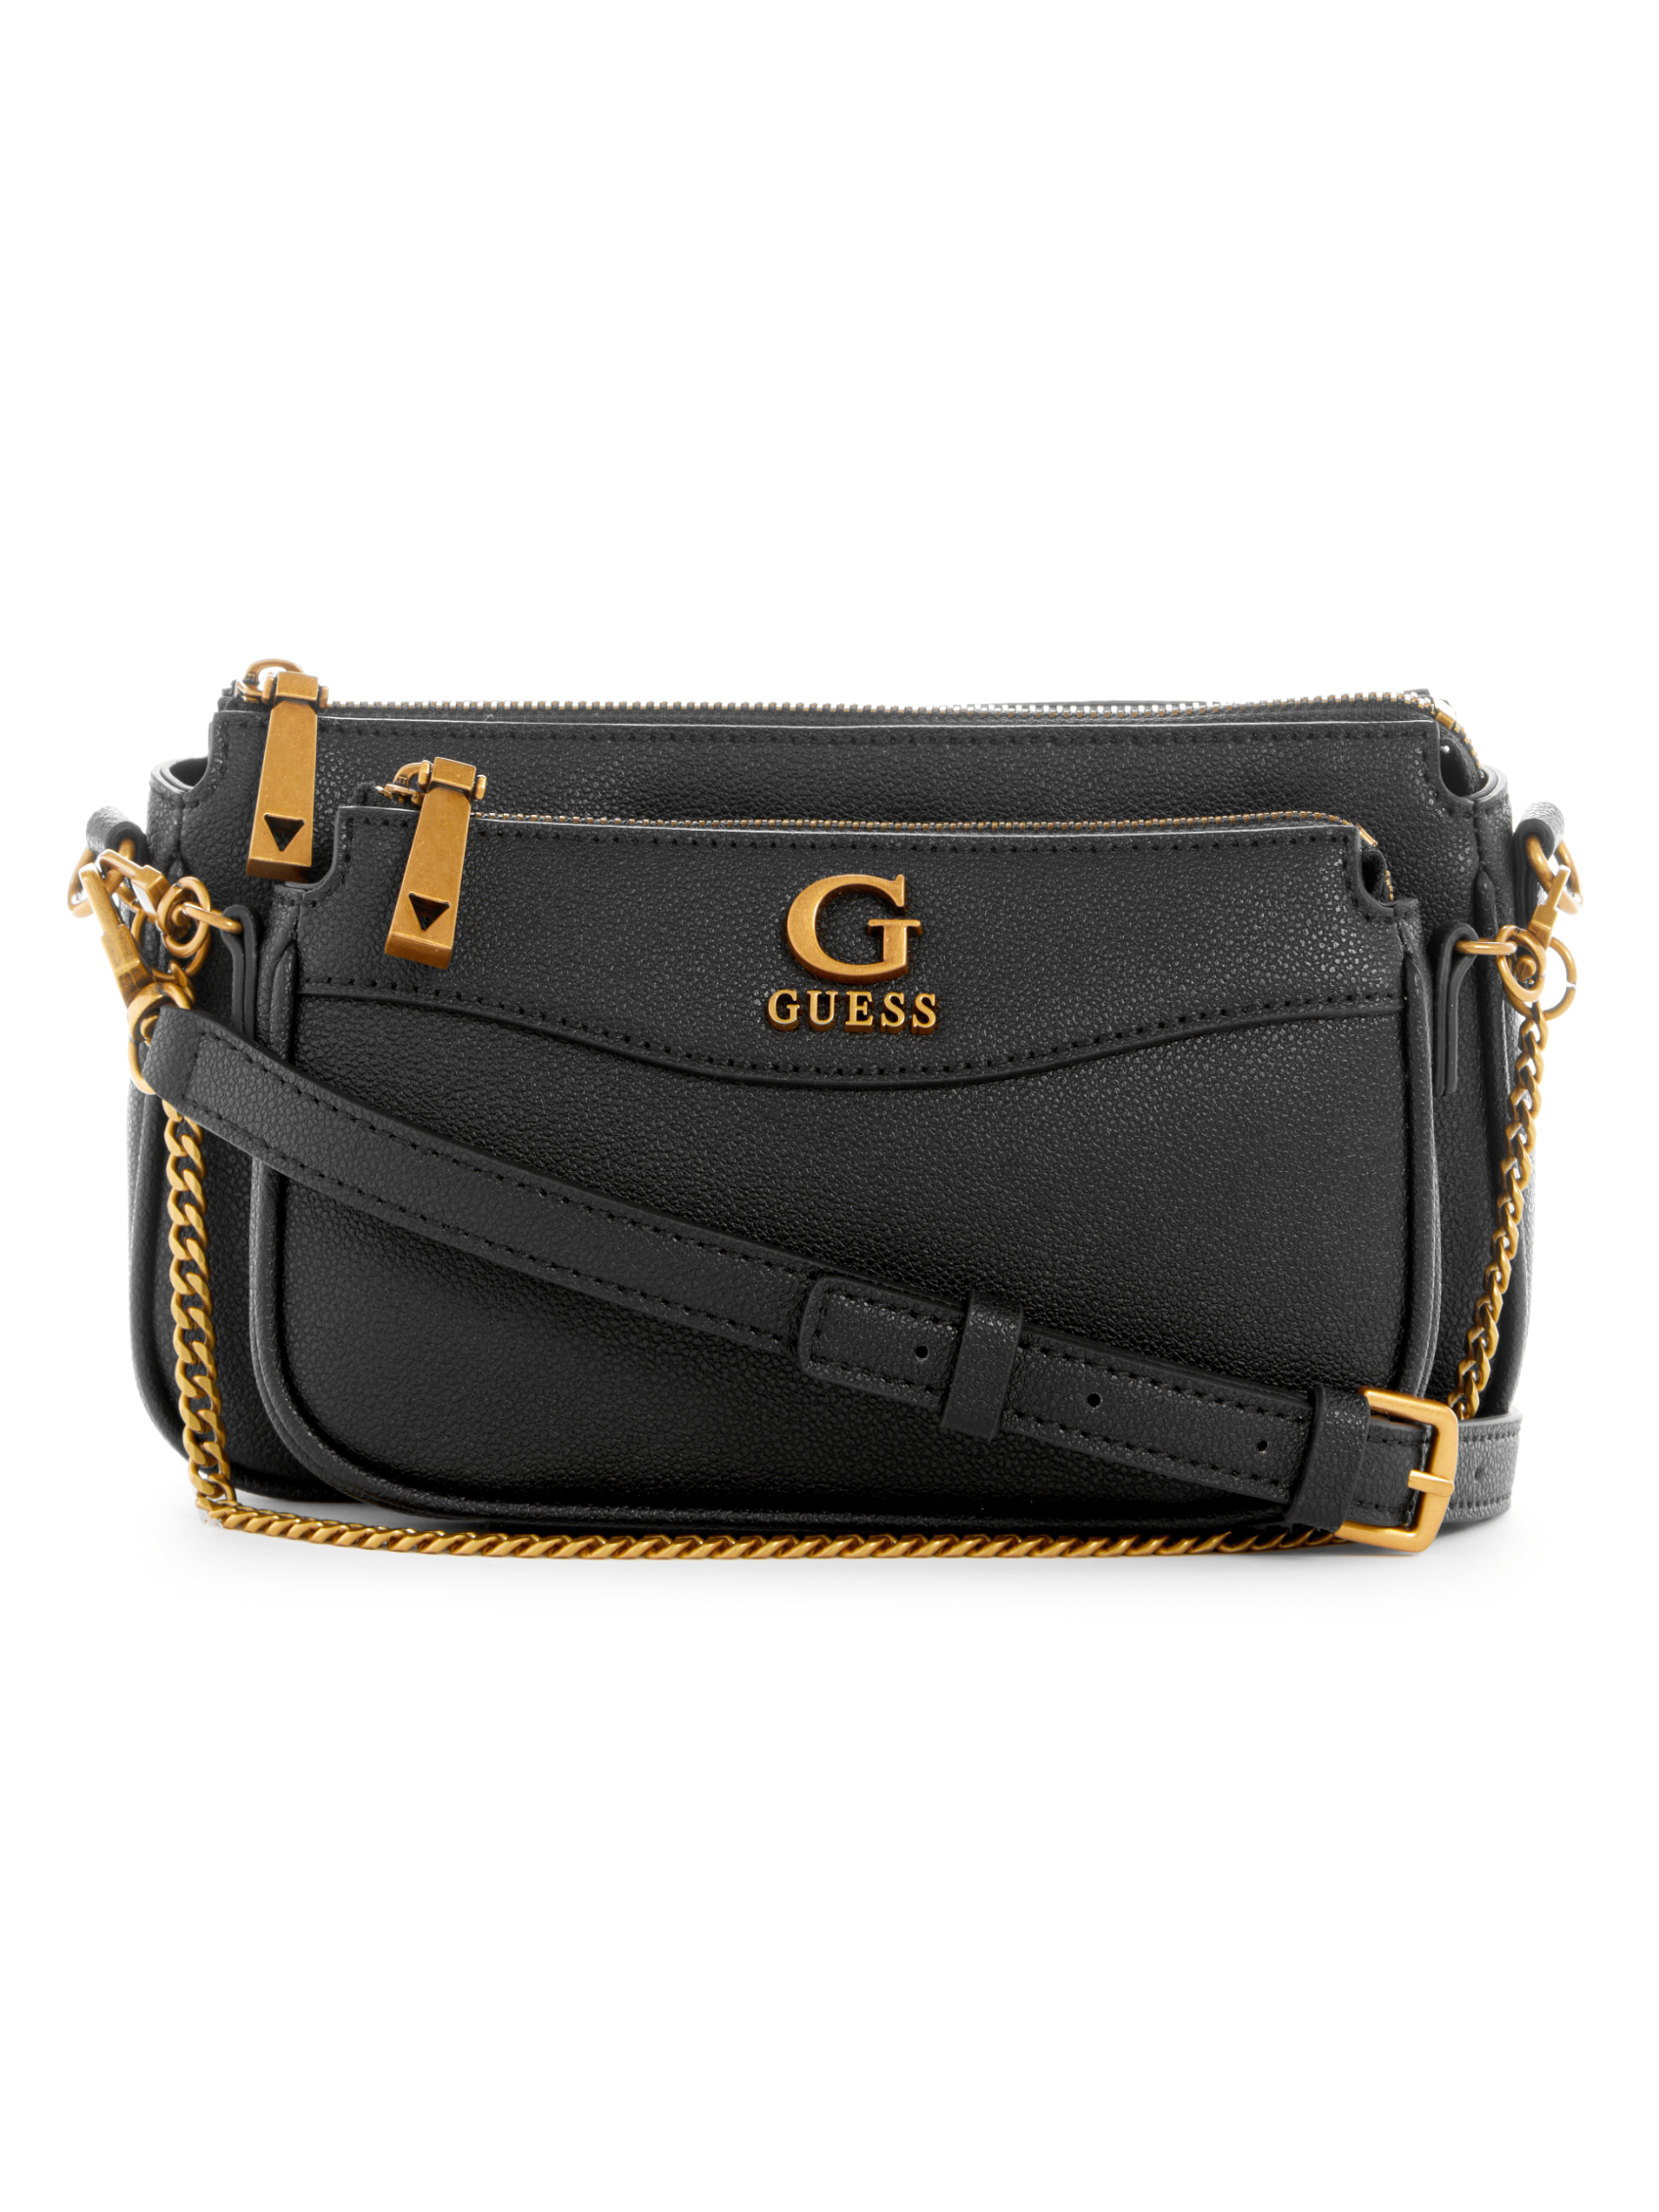 NELL DOUBLE POUCH CROSSBODY | Guess Philippines